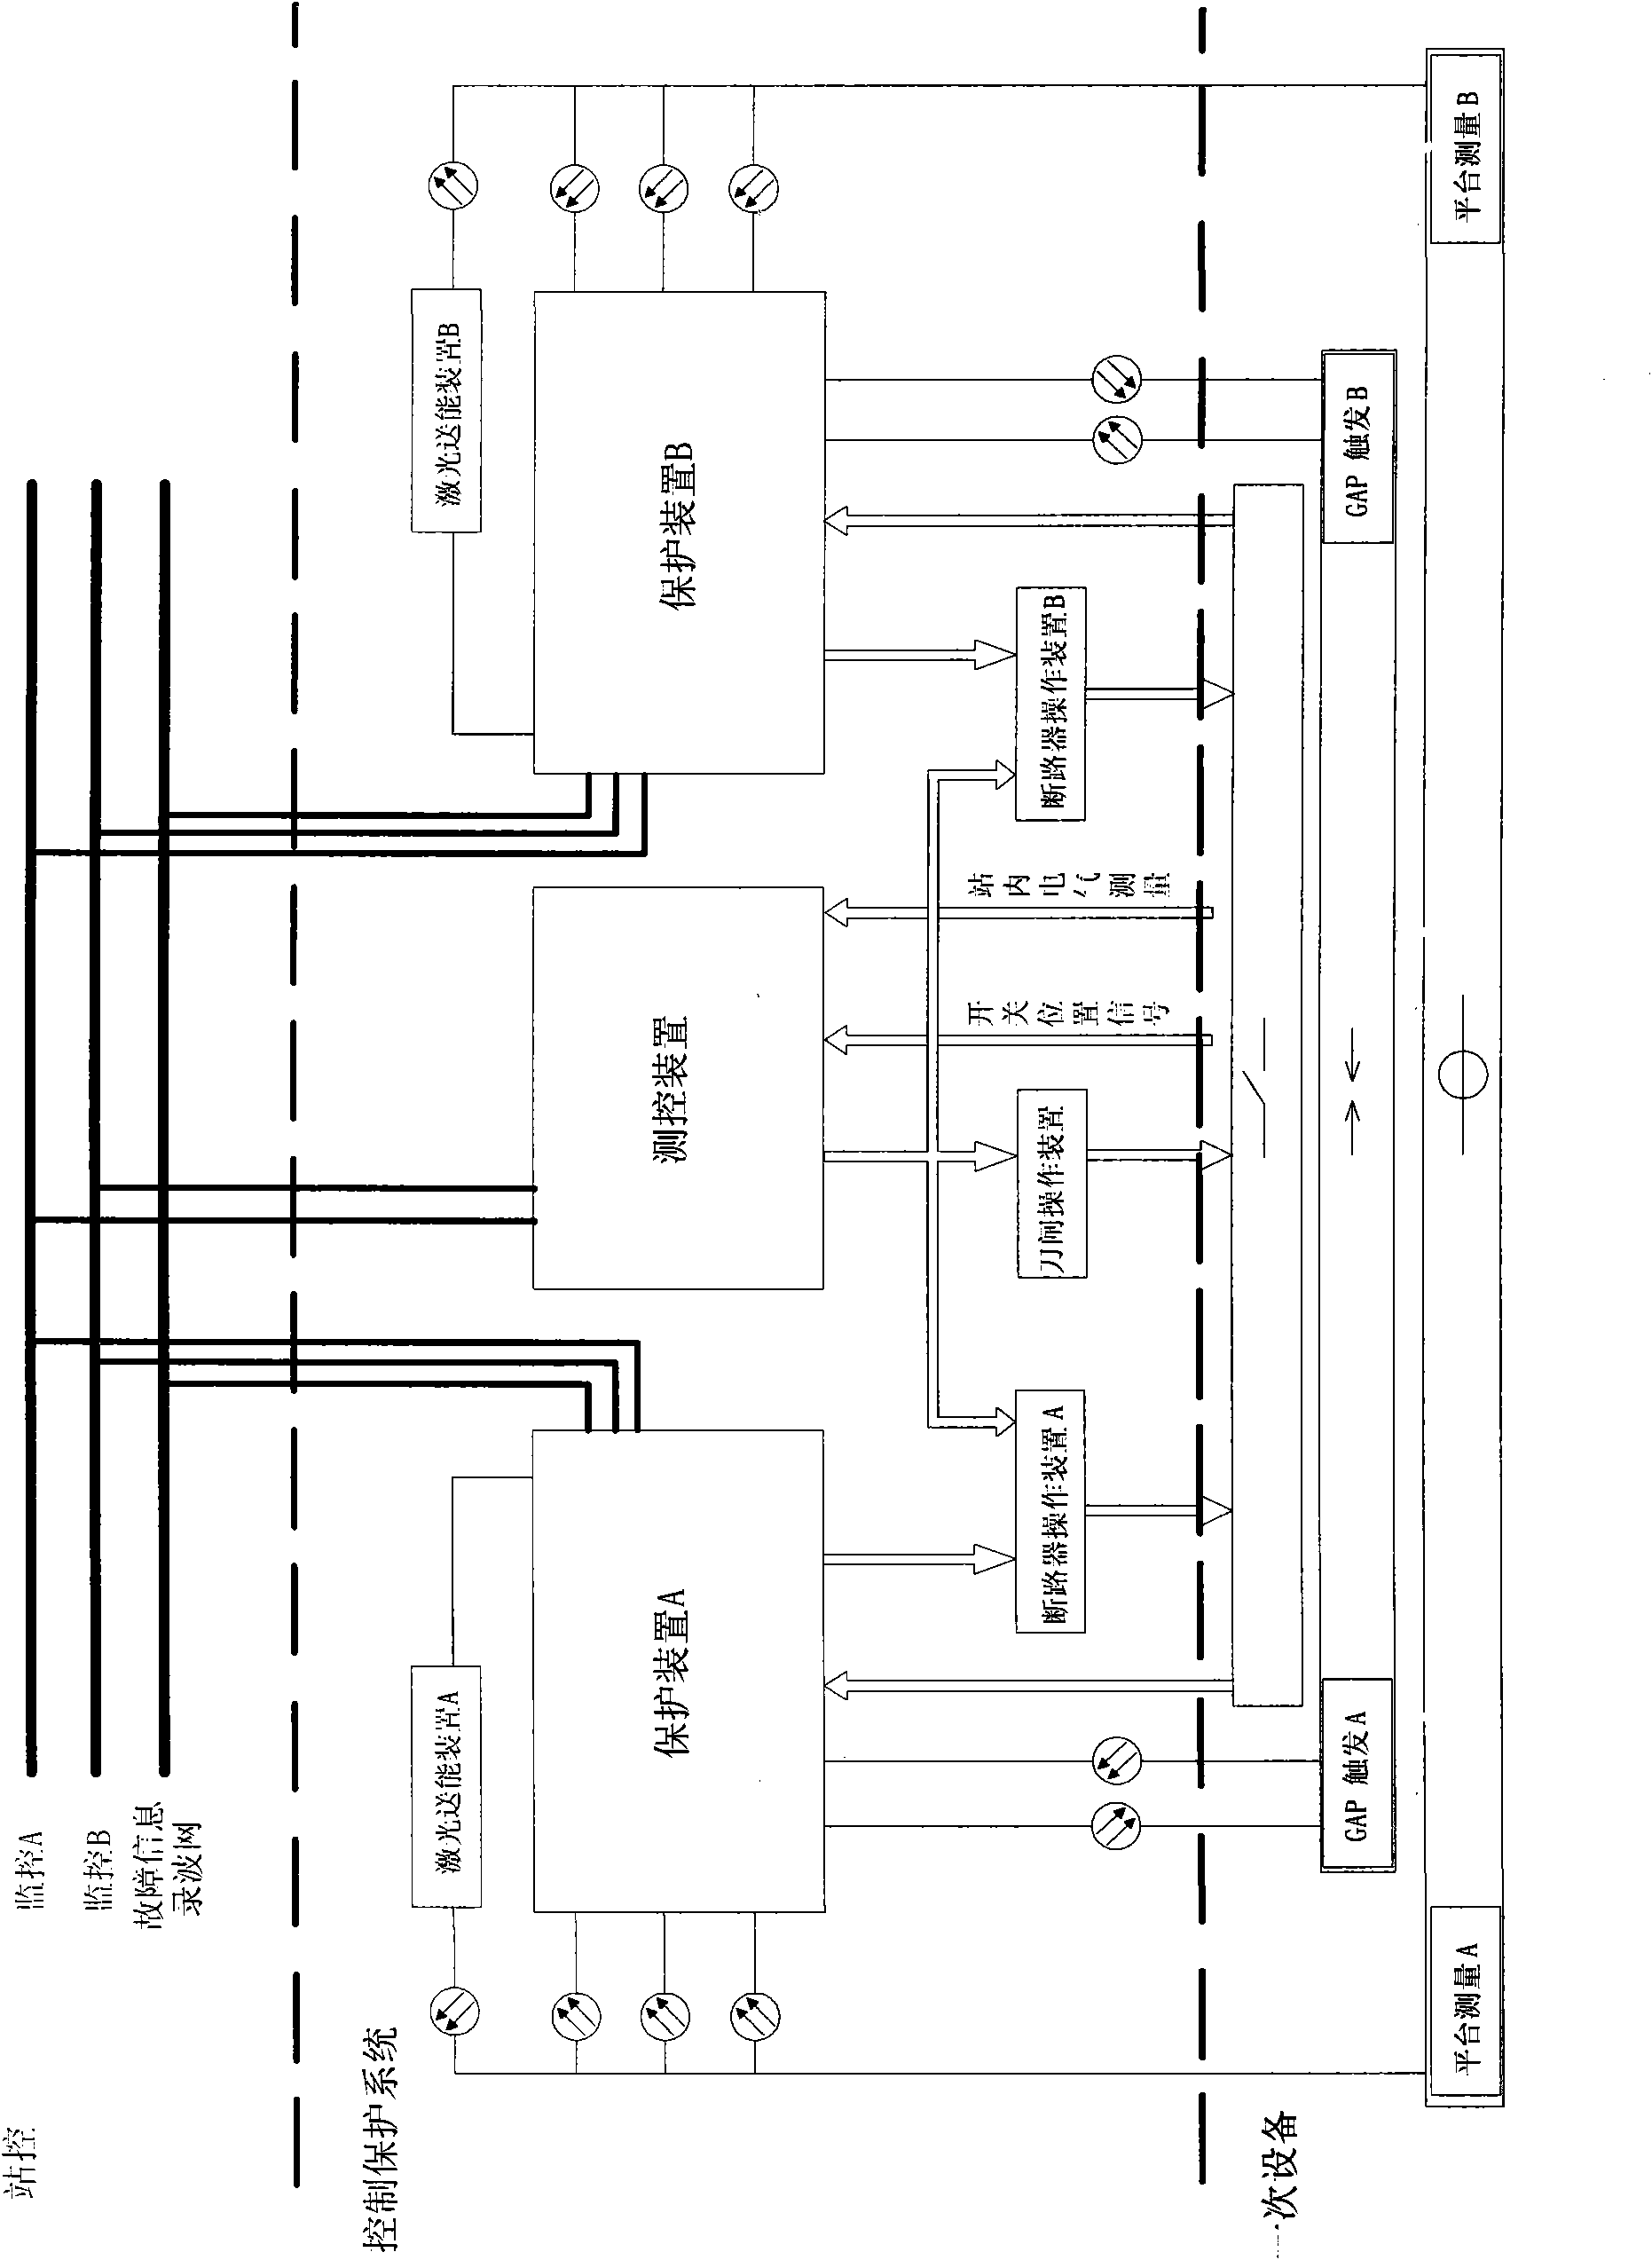 Control and protection system of series compensation device or fault current limiter